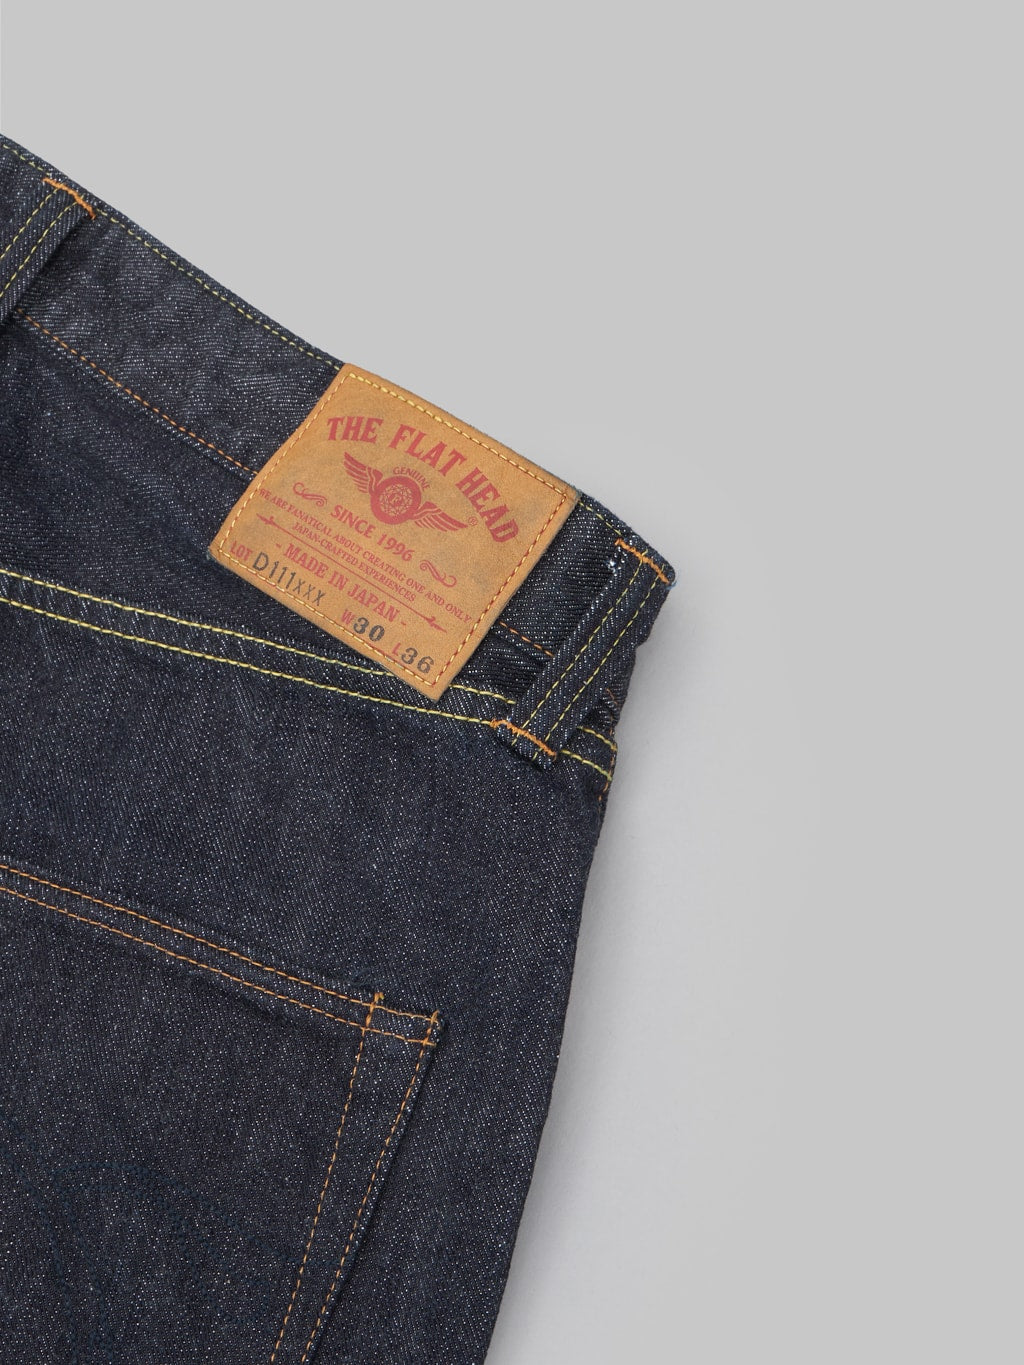 the flat head fn d111 wide straight selvedge denim jeans leather patch